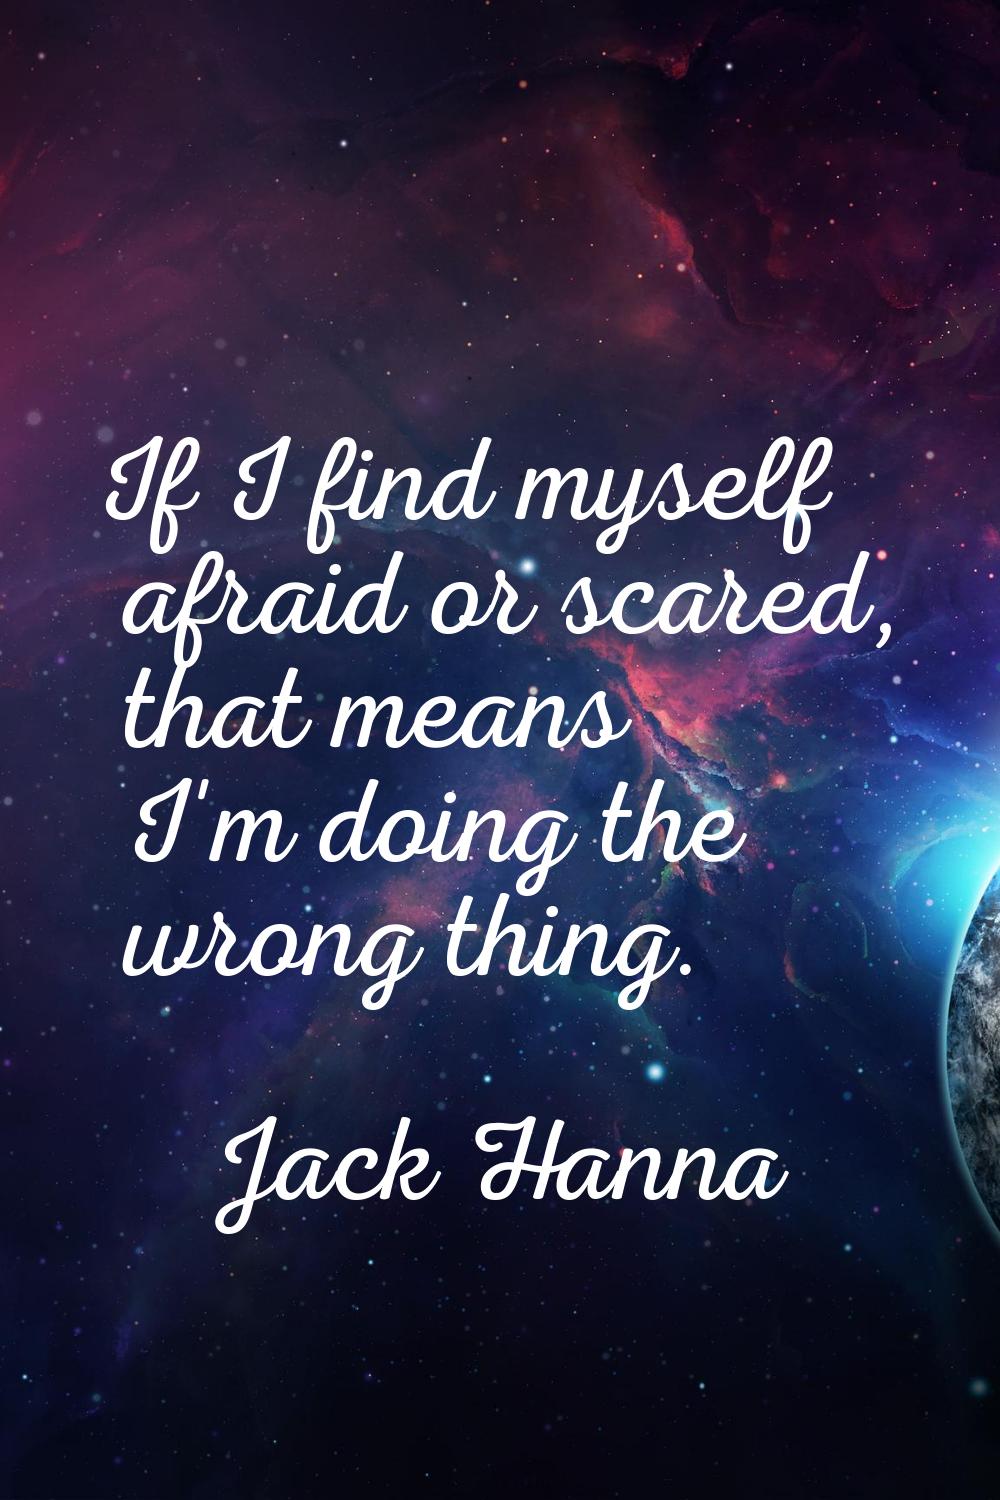 If I find myself afraid or scared, that means I'm doing the wrong thing.